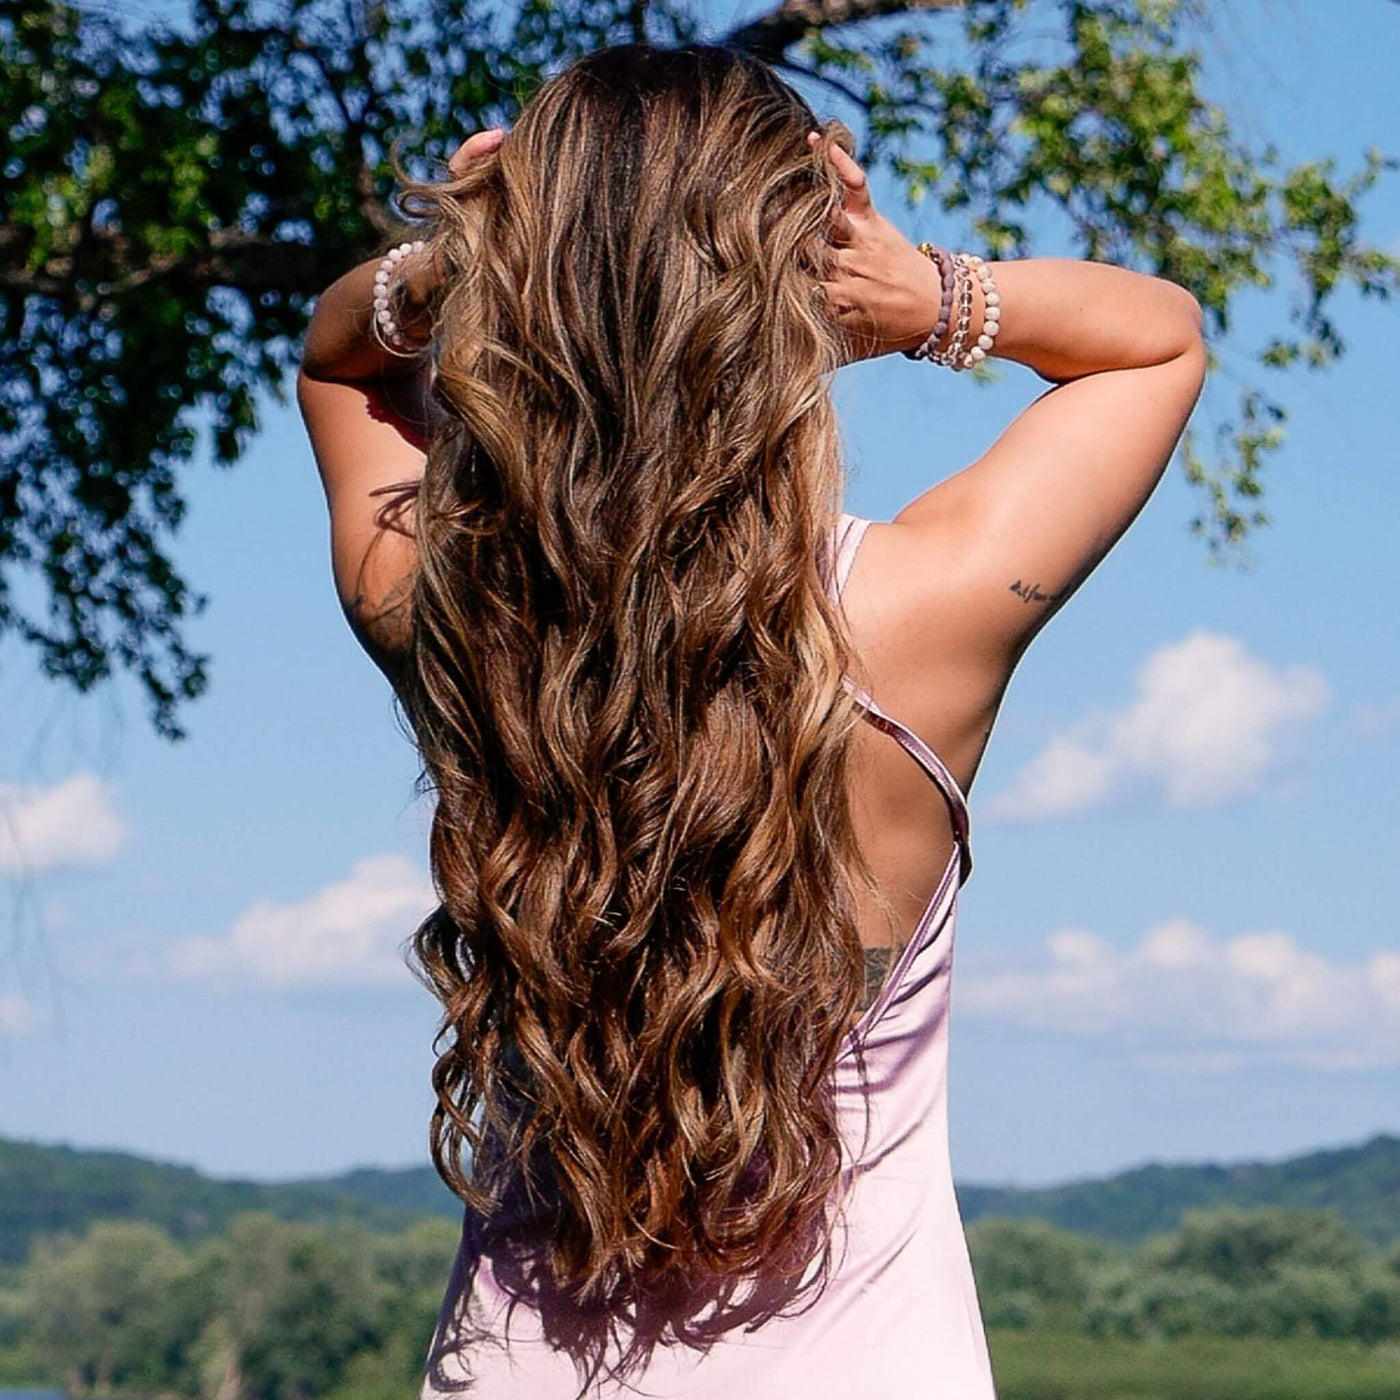 Long brown hair with waves created using the TYME Iron Air: Obsidian.